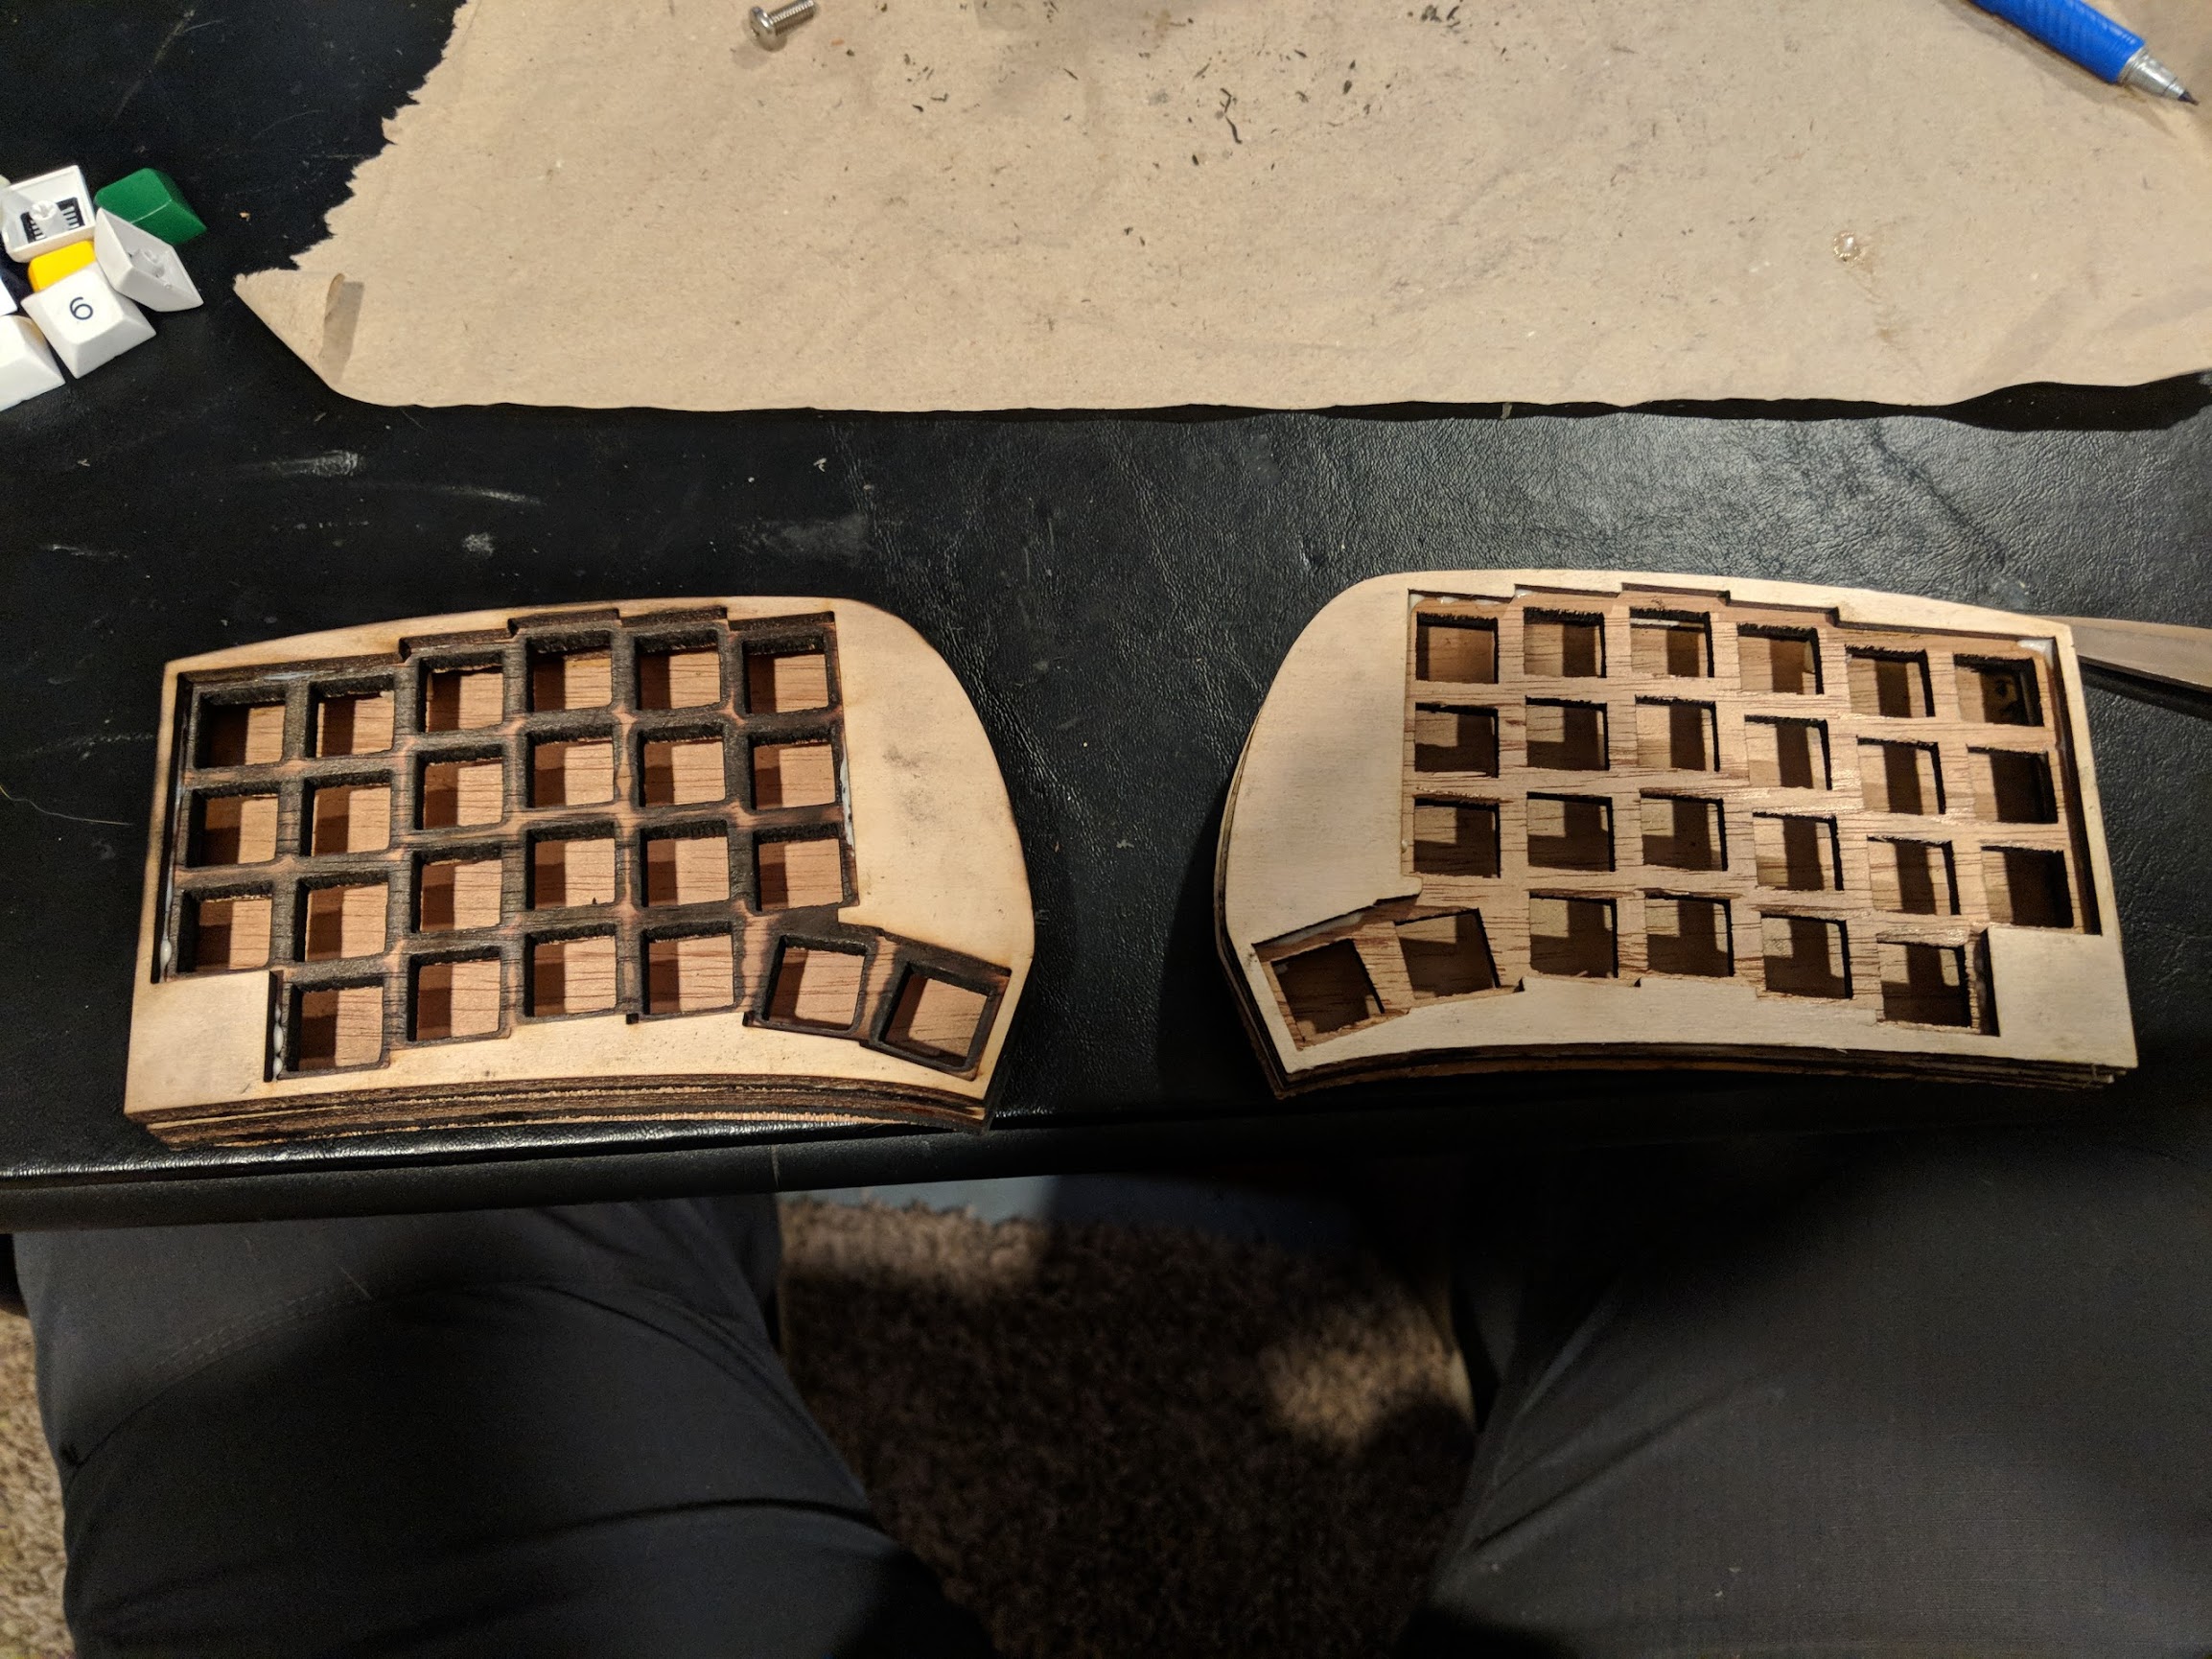 Split keyboard made of wood without any switches in it